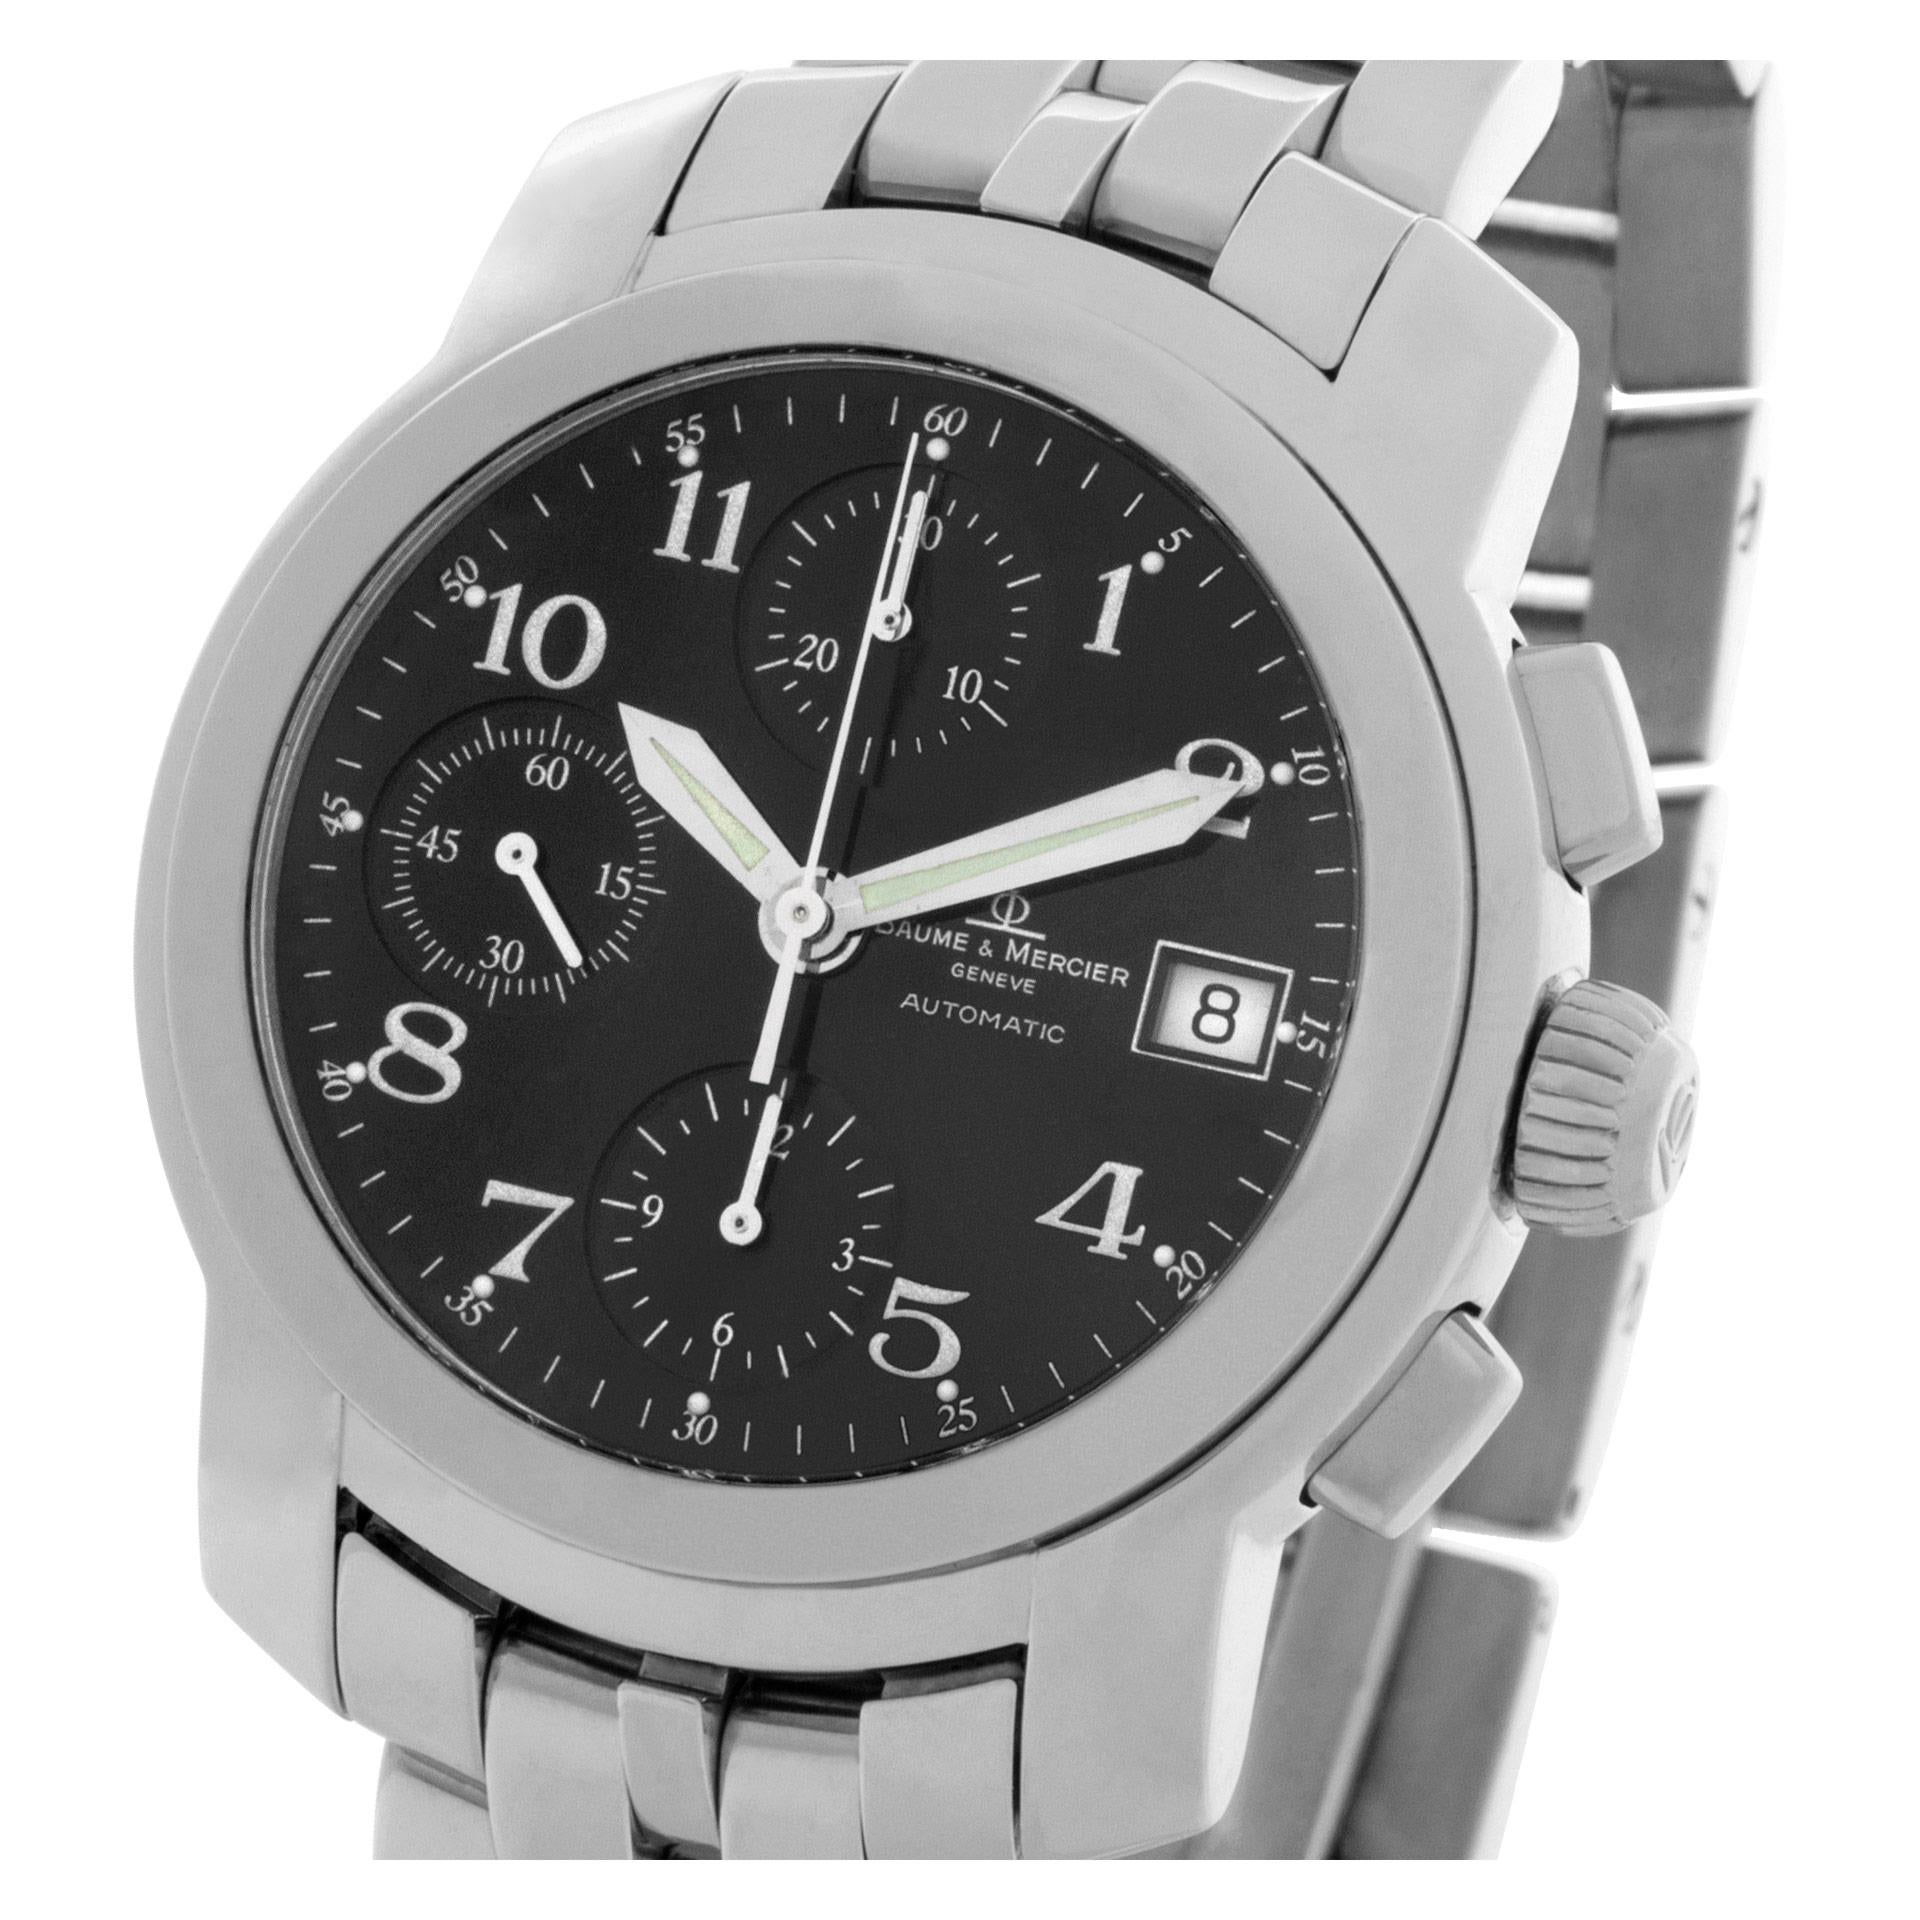 Baume & Mercier Capeland Chronograph in stainless steel. Auto w/ subseconds, date and chronograph. 38 mm case size. Ref MVO45216. Circa 2010s. Fine Pre-owned Baume & Mercier Watch.

Certified preowned Sport Baume & Mercier Capeland watch is made out